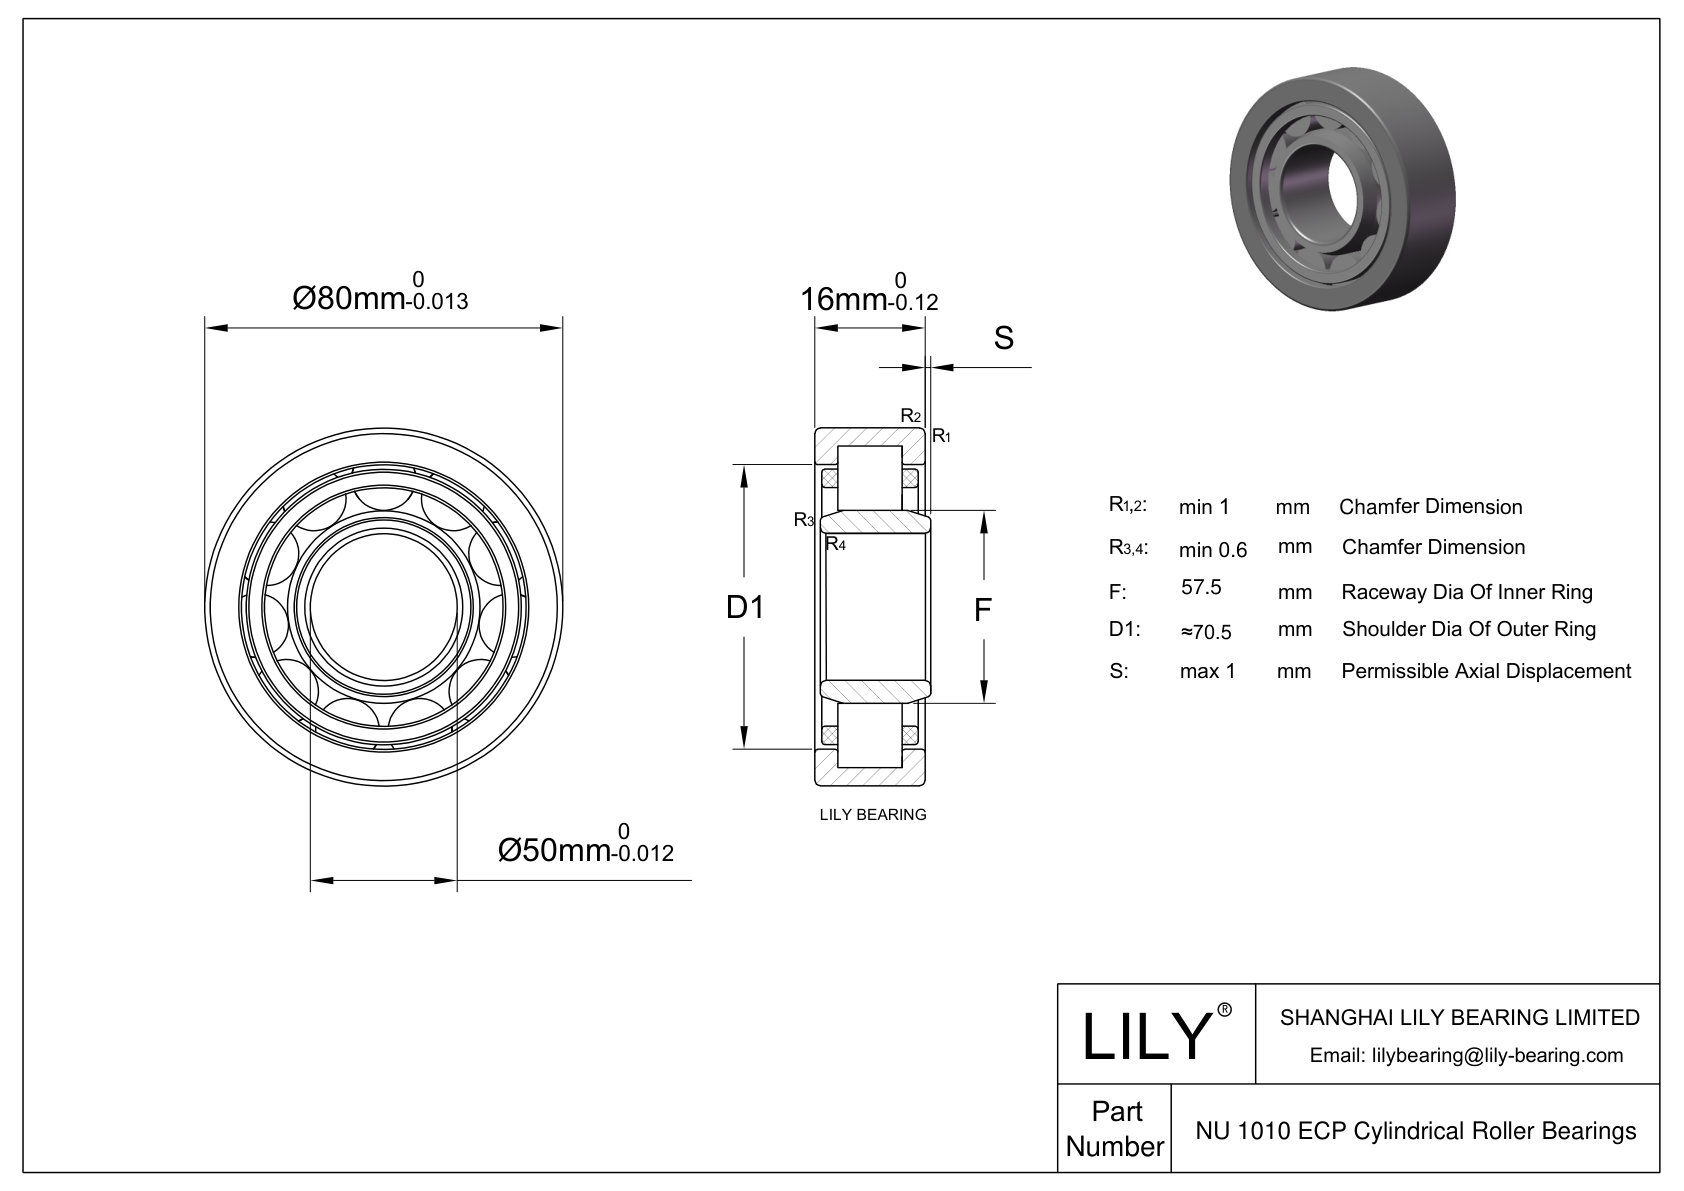 NU 1010 ECP/C3VL0241 Ceramic Coated Cylindrical Roller Bearings cad drawing